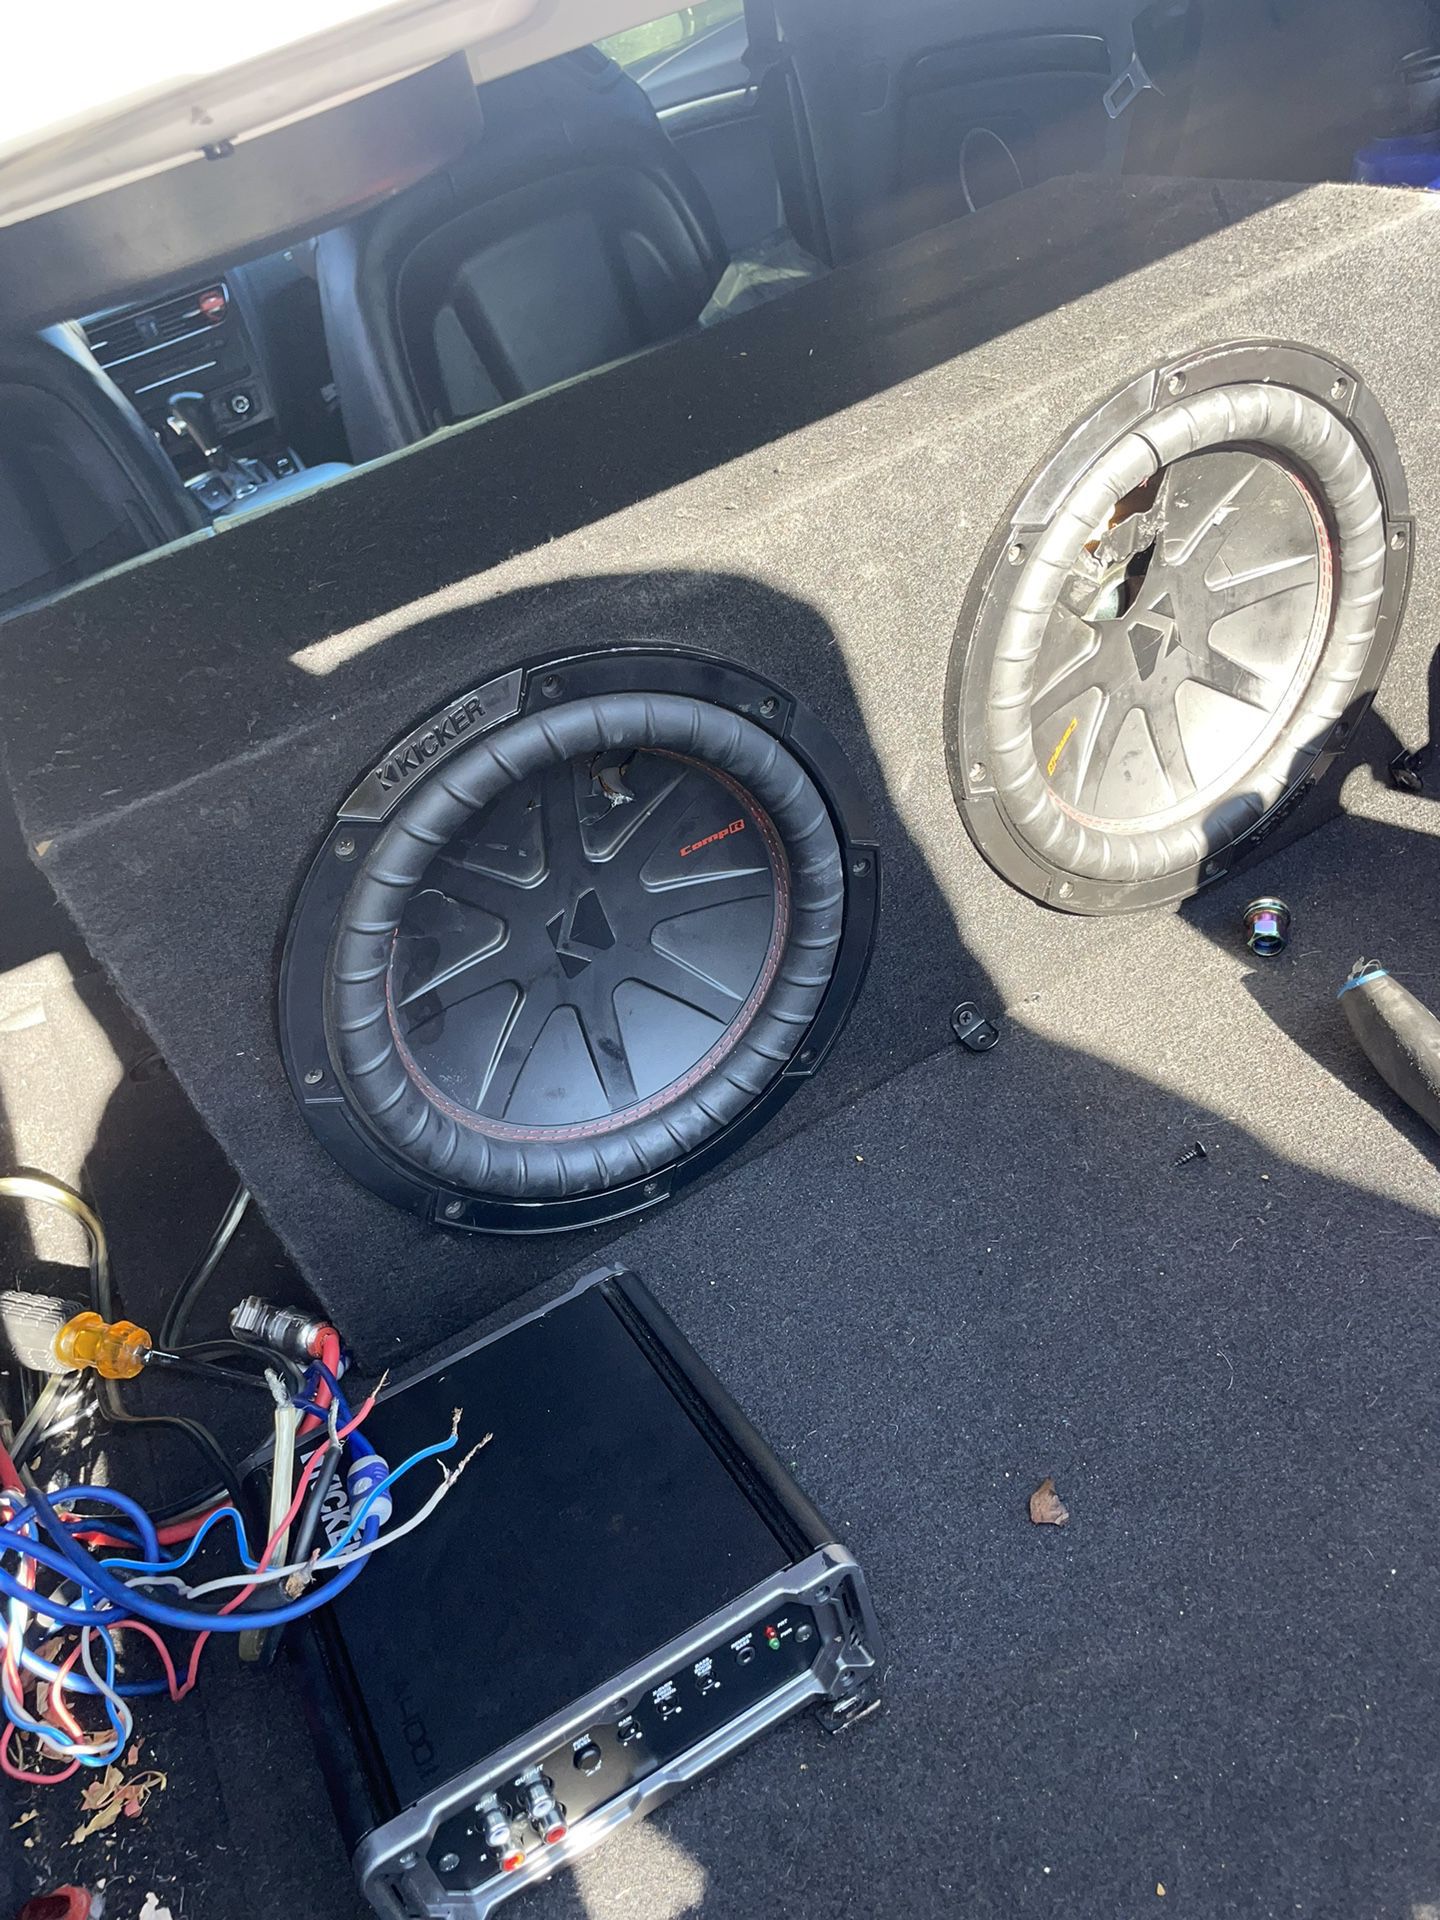 Kickers sub woofer and amp whole set up